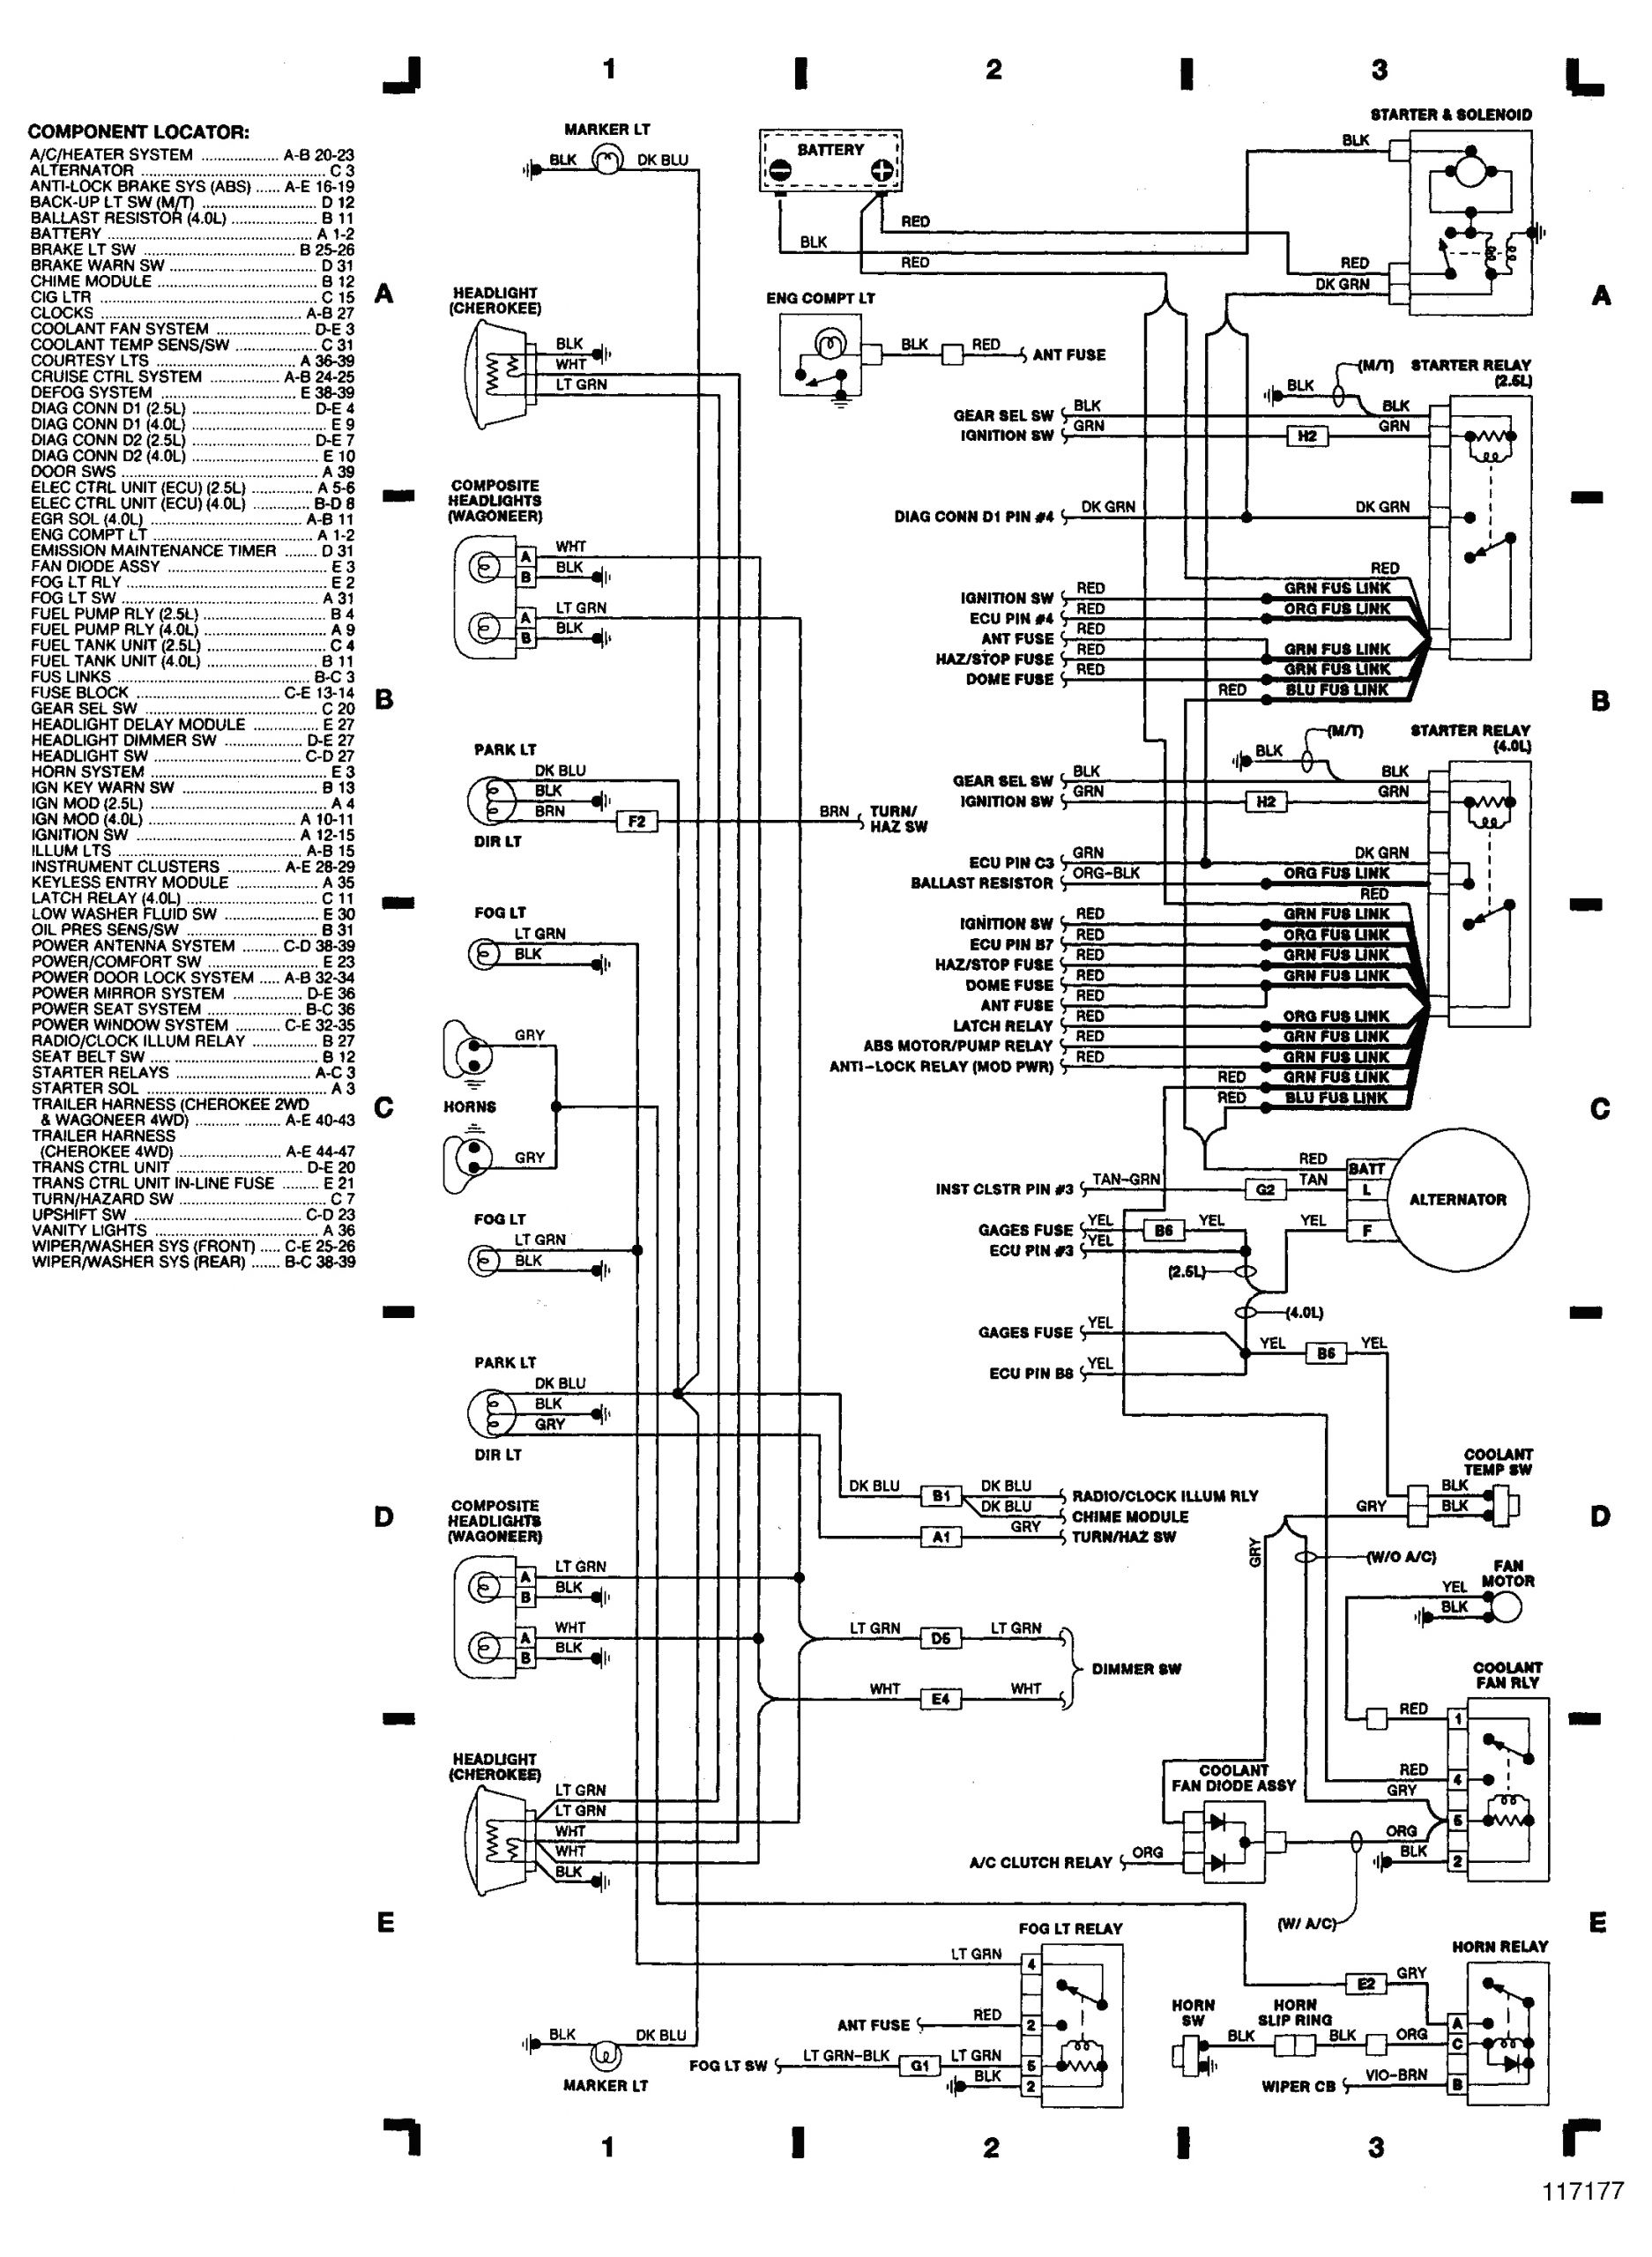 Cen Tech Battery Charger Wiring Diagram 2005 Jeep Liberty Wiring Harness Diagram Tuli Repeat5